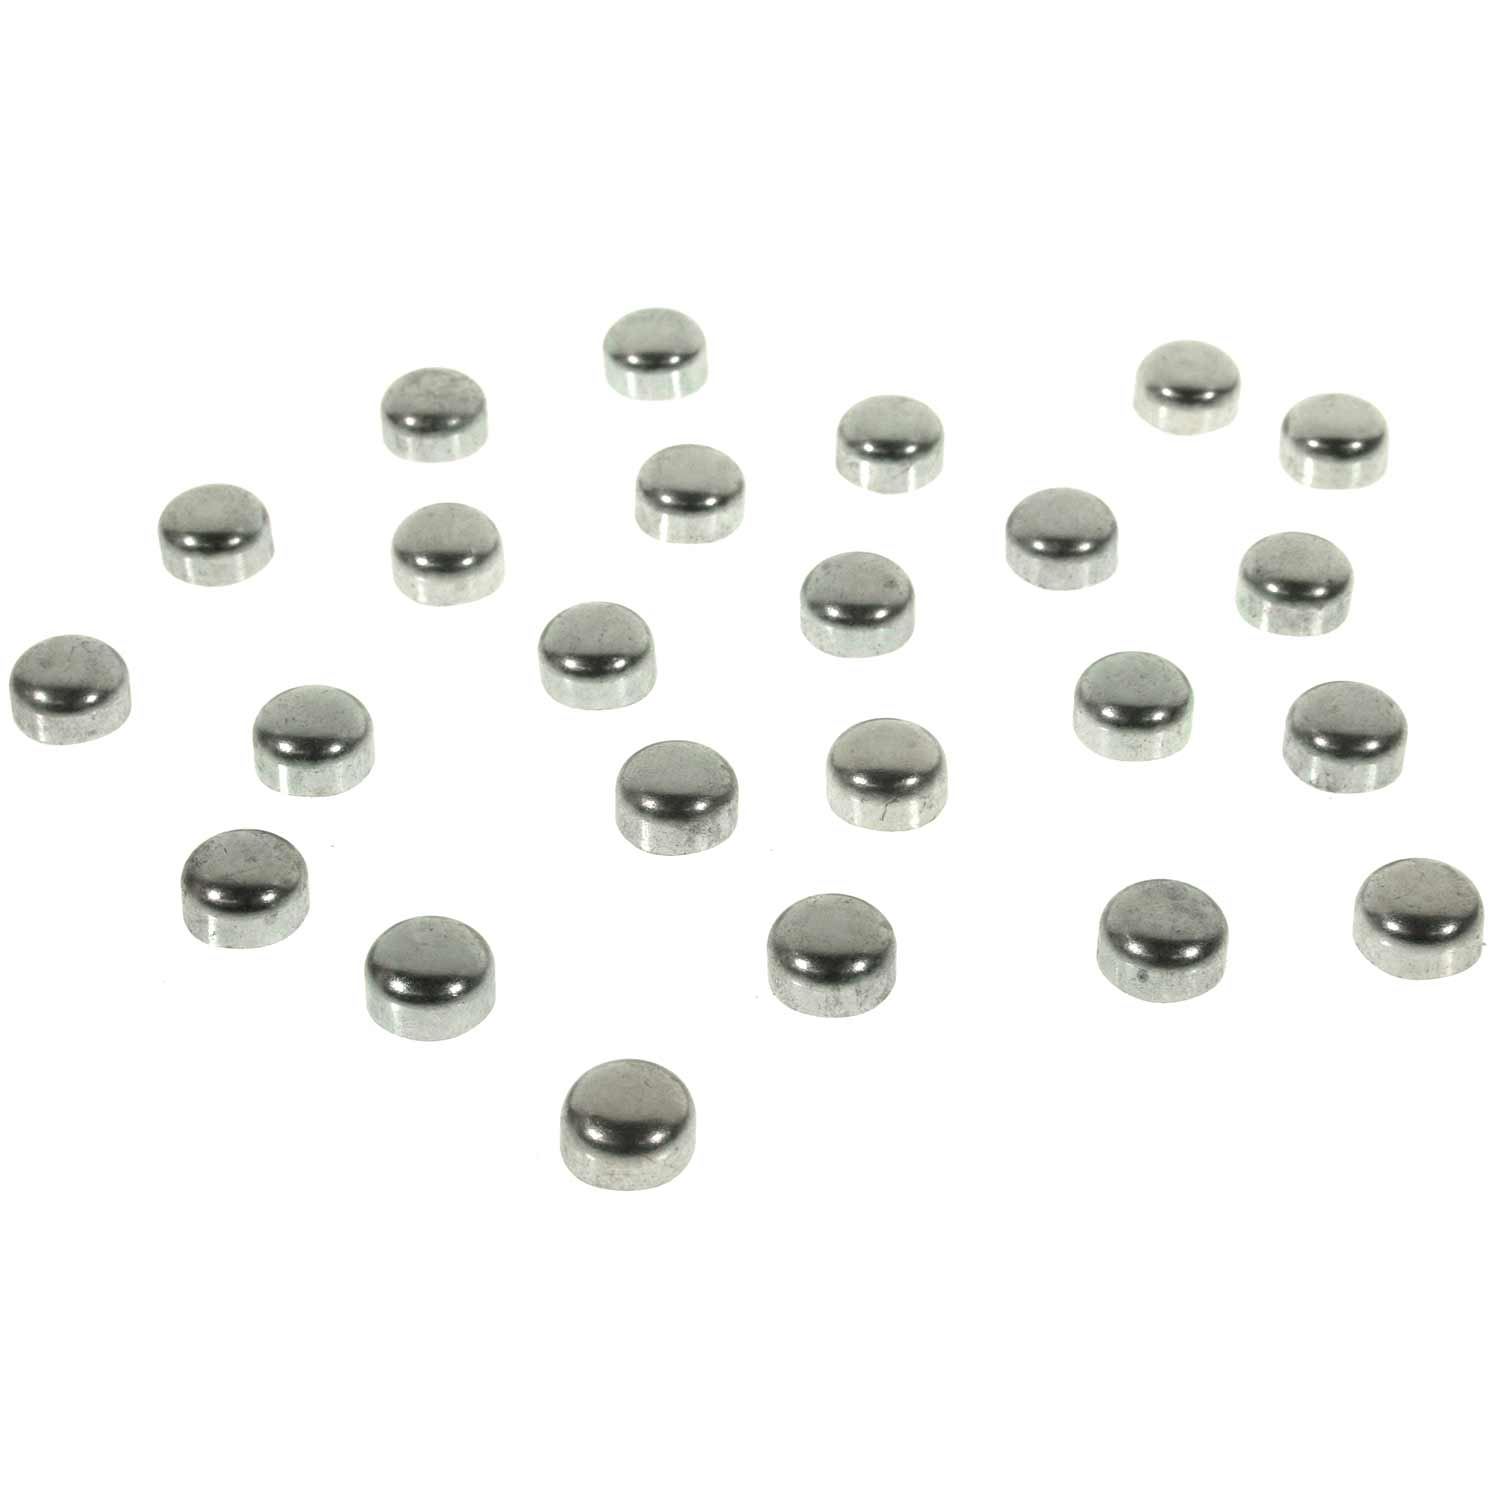 EXPANSION PLUGS (25 PACK)